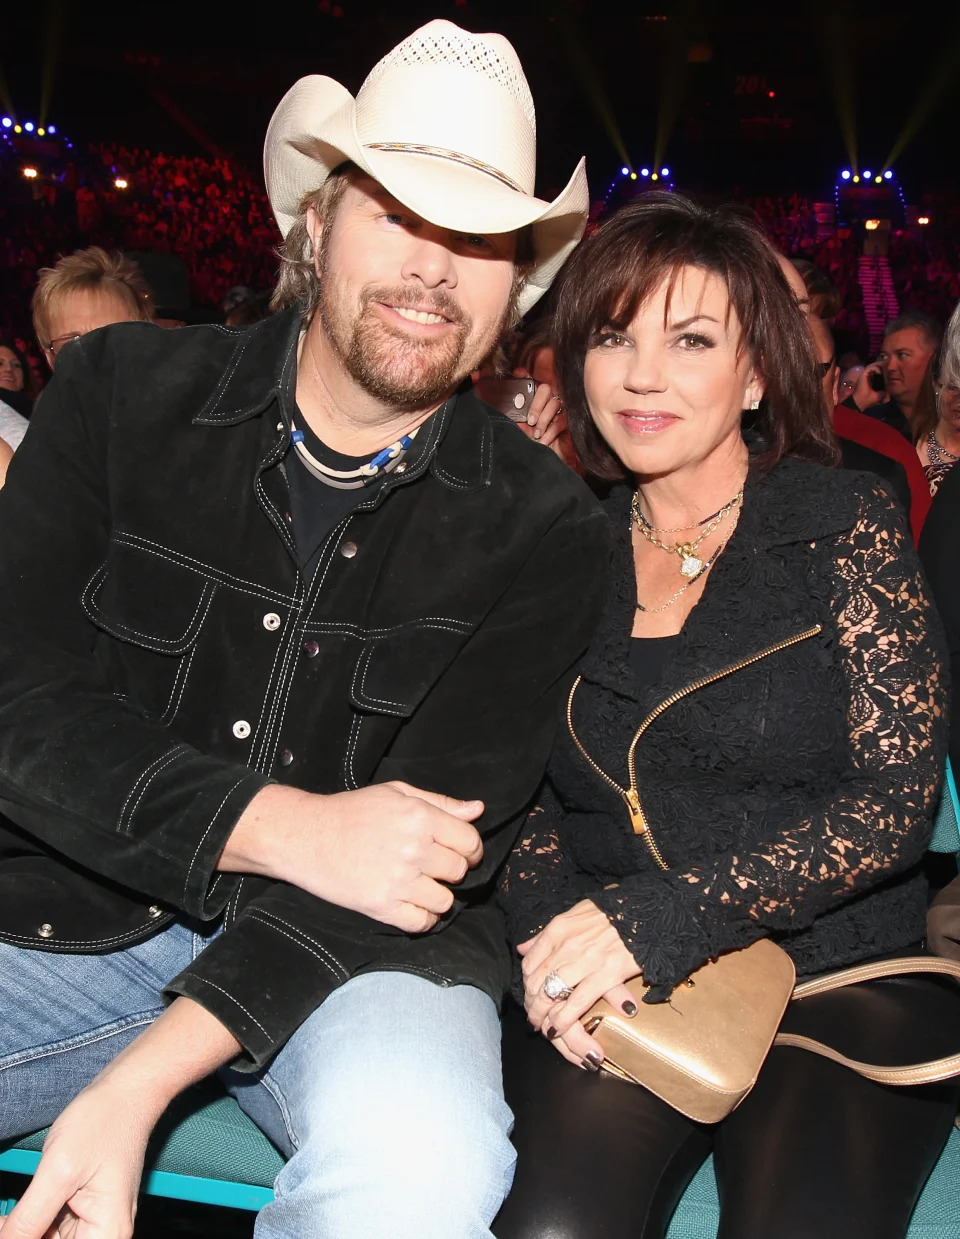 Toby Keith’s Widow Fears Threats If Public Learns About Late Country Star’s Secret Businesses